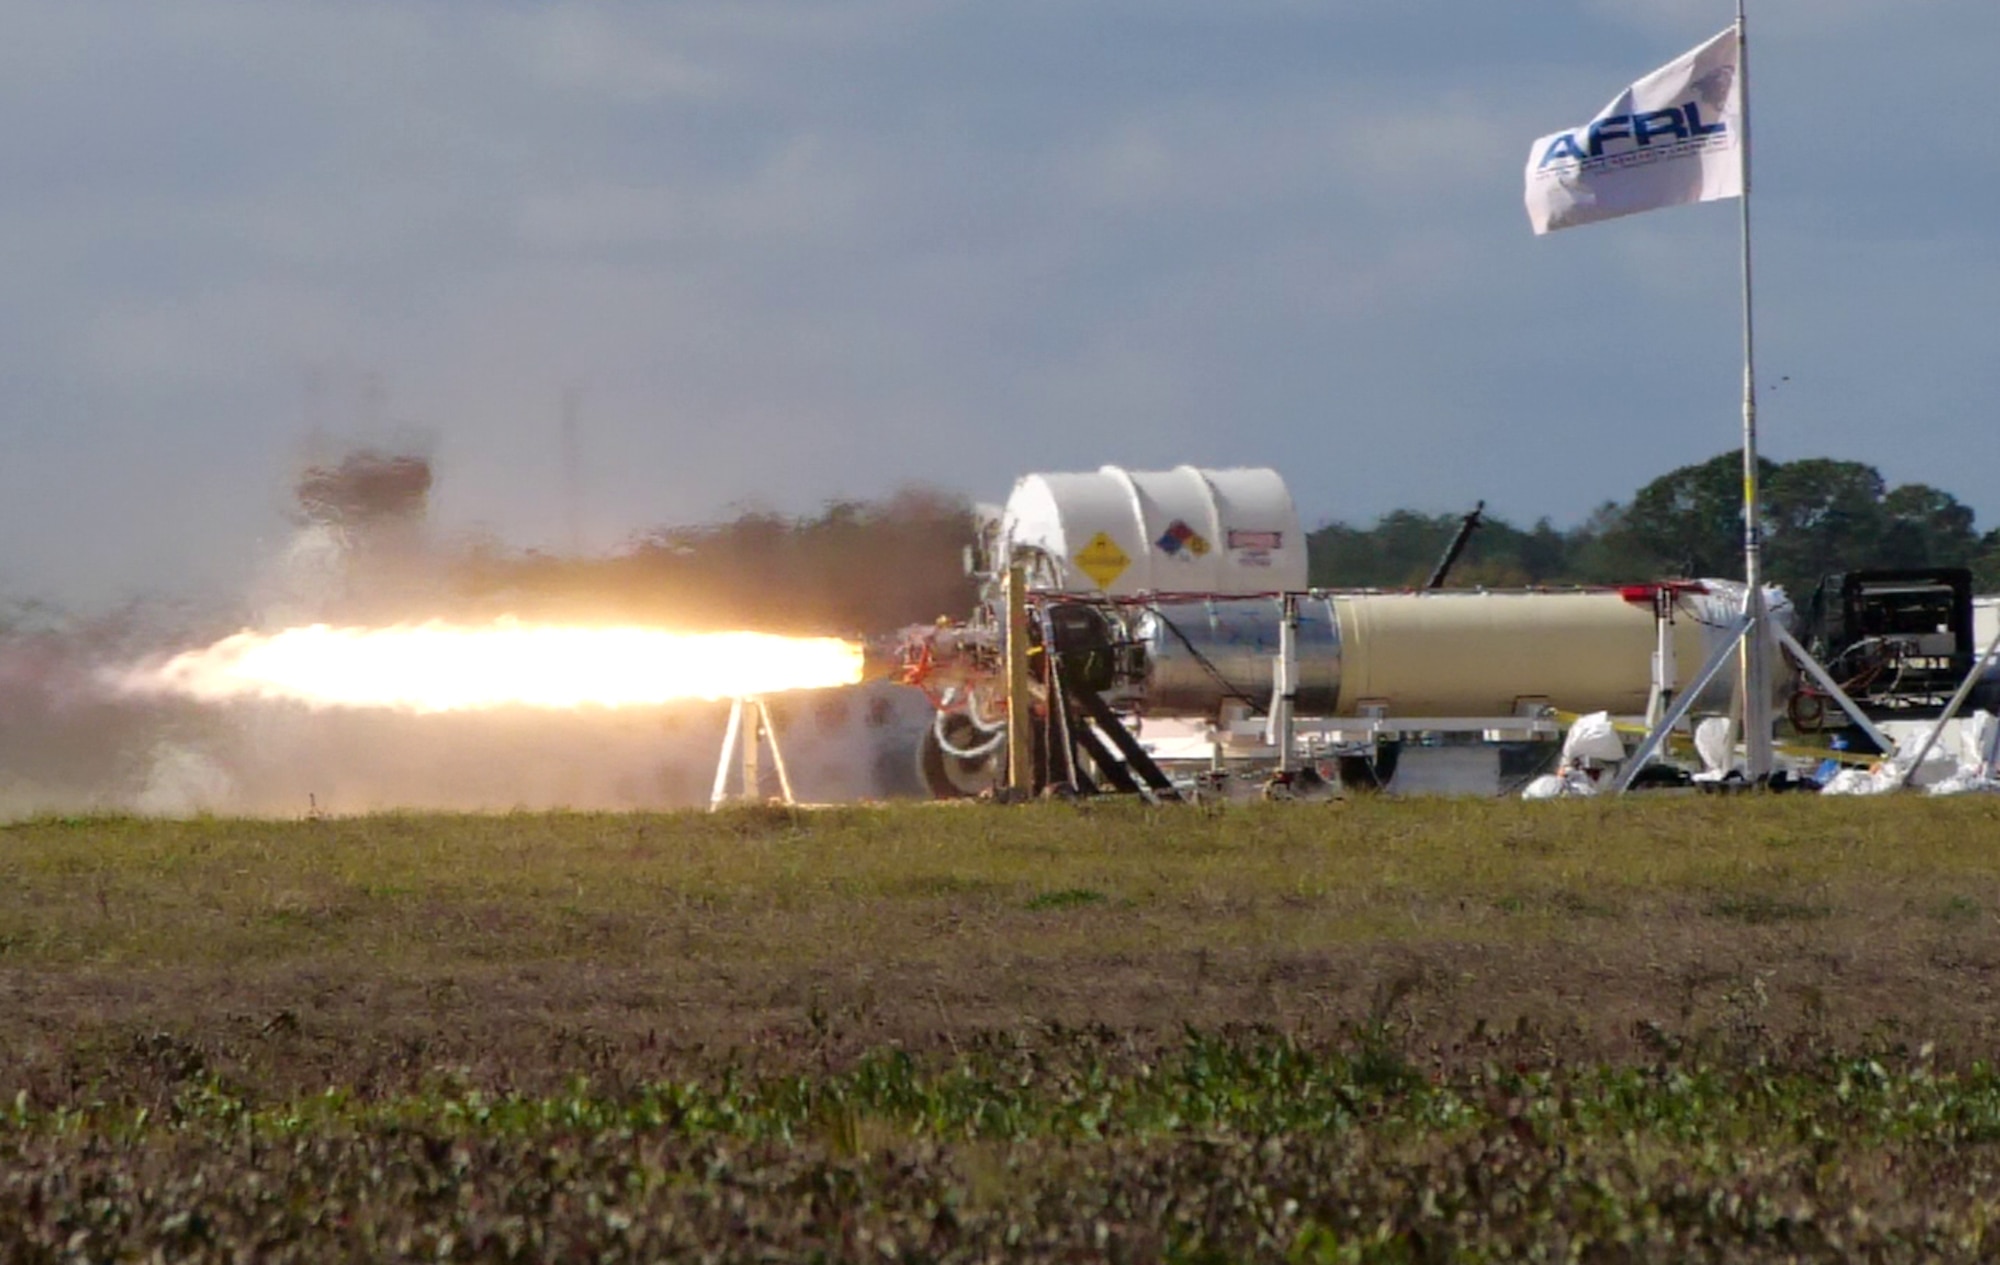 A recent X-60A hot fire test, conducted at Cecil Spaceport in Jacksonville, Florida. The X-60A, developed through an Air Force Research Laboratory Small Business Innovation Research contract, is an air-launched rocket designed for hypersonic flight research. (U.S. Air Force photo)